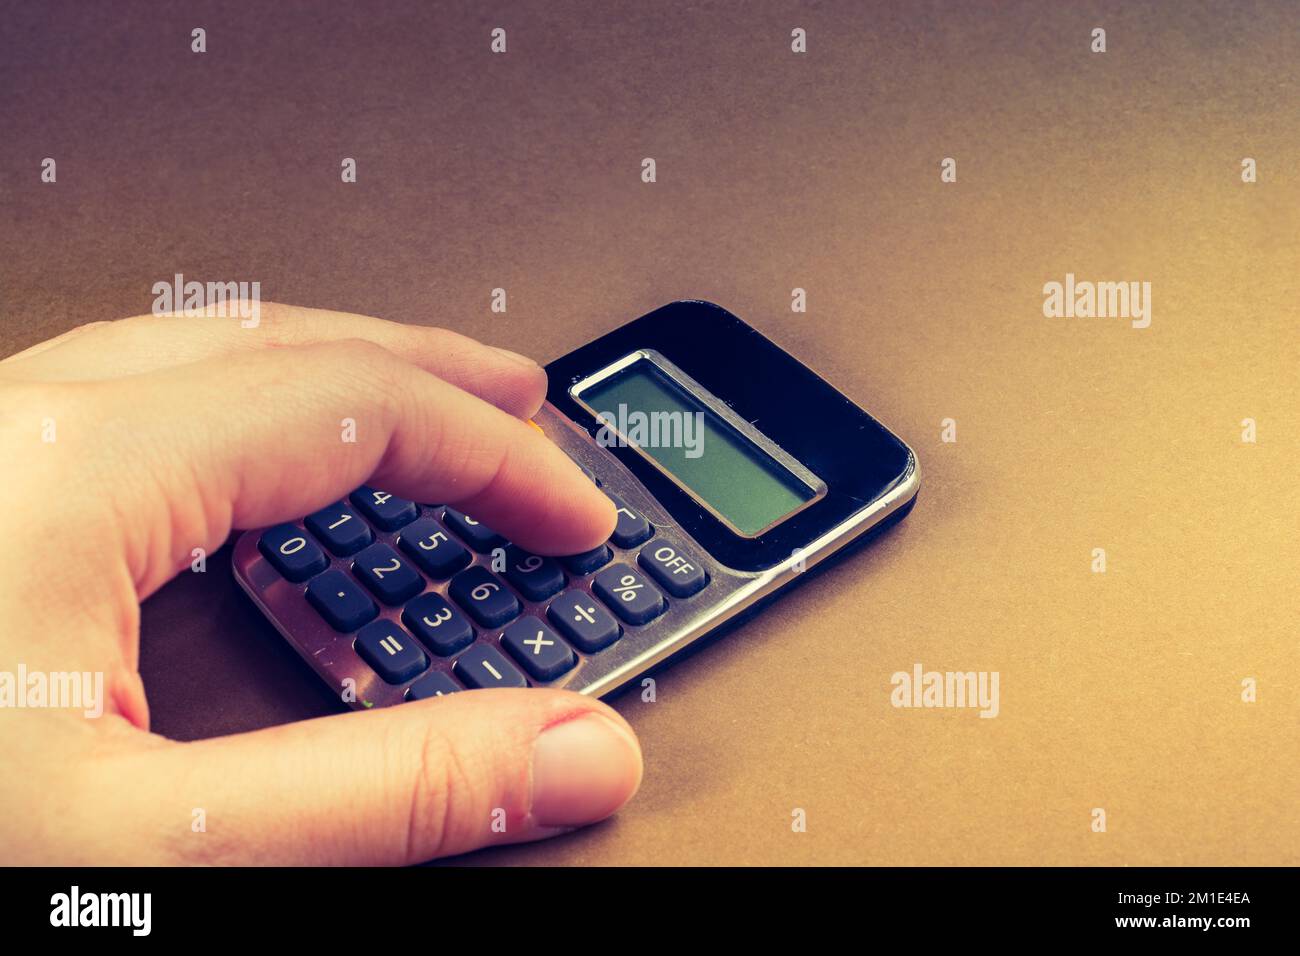 Electronic calculator device with keyboard and display in hand Stock Photo